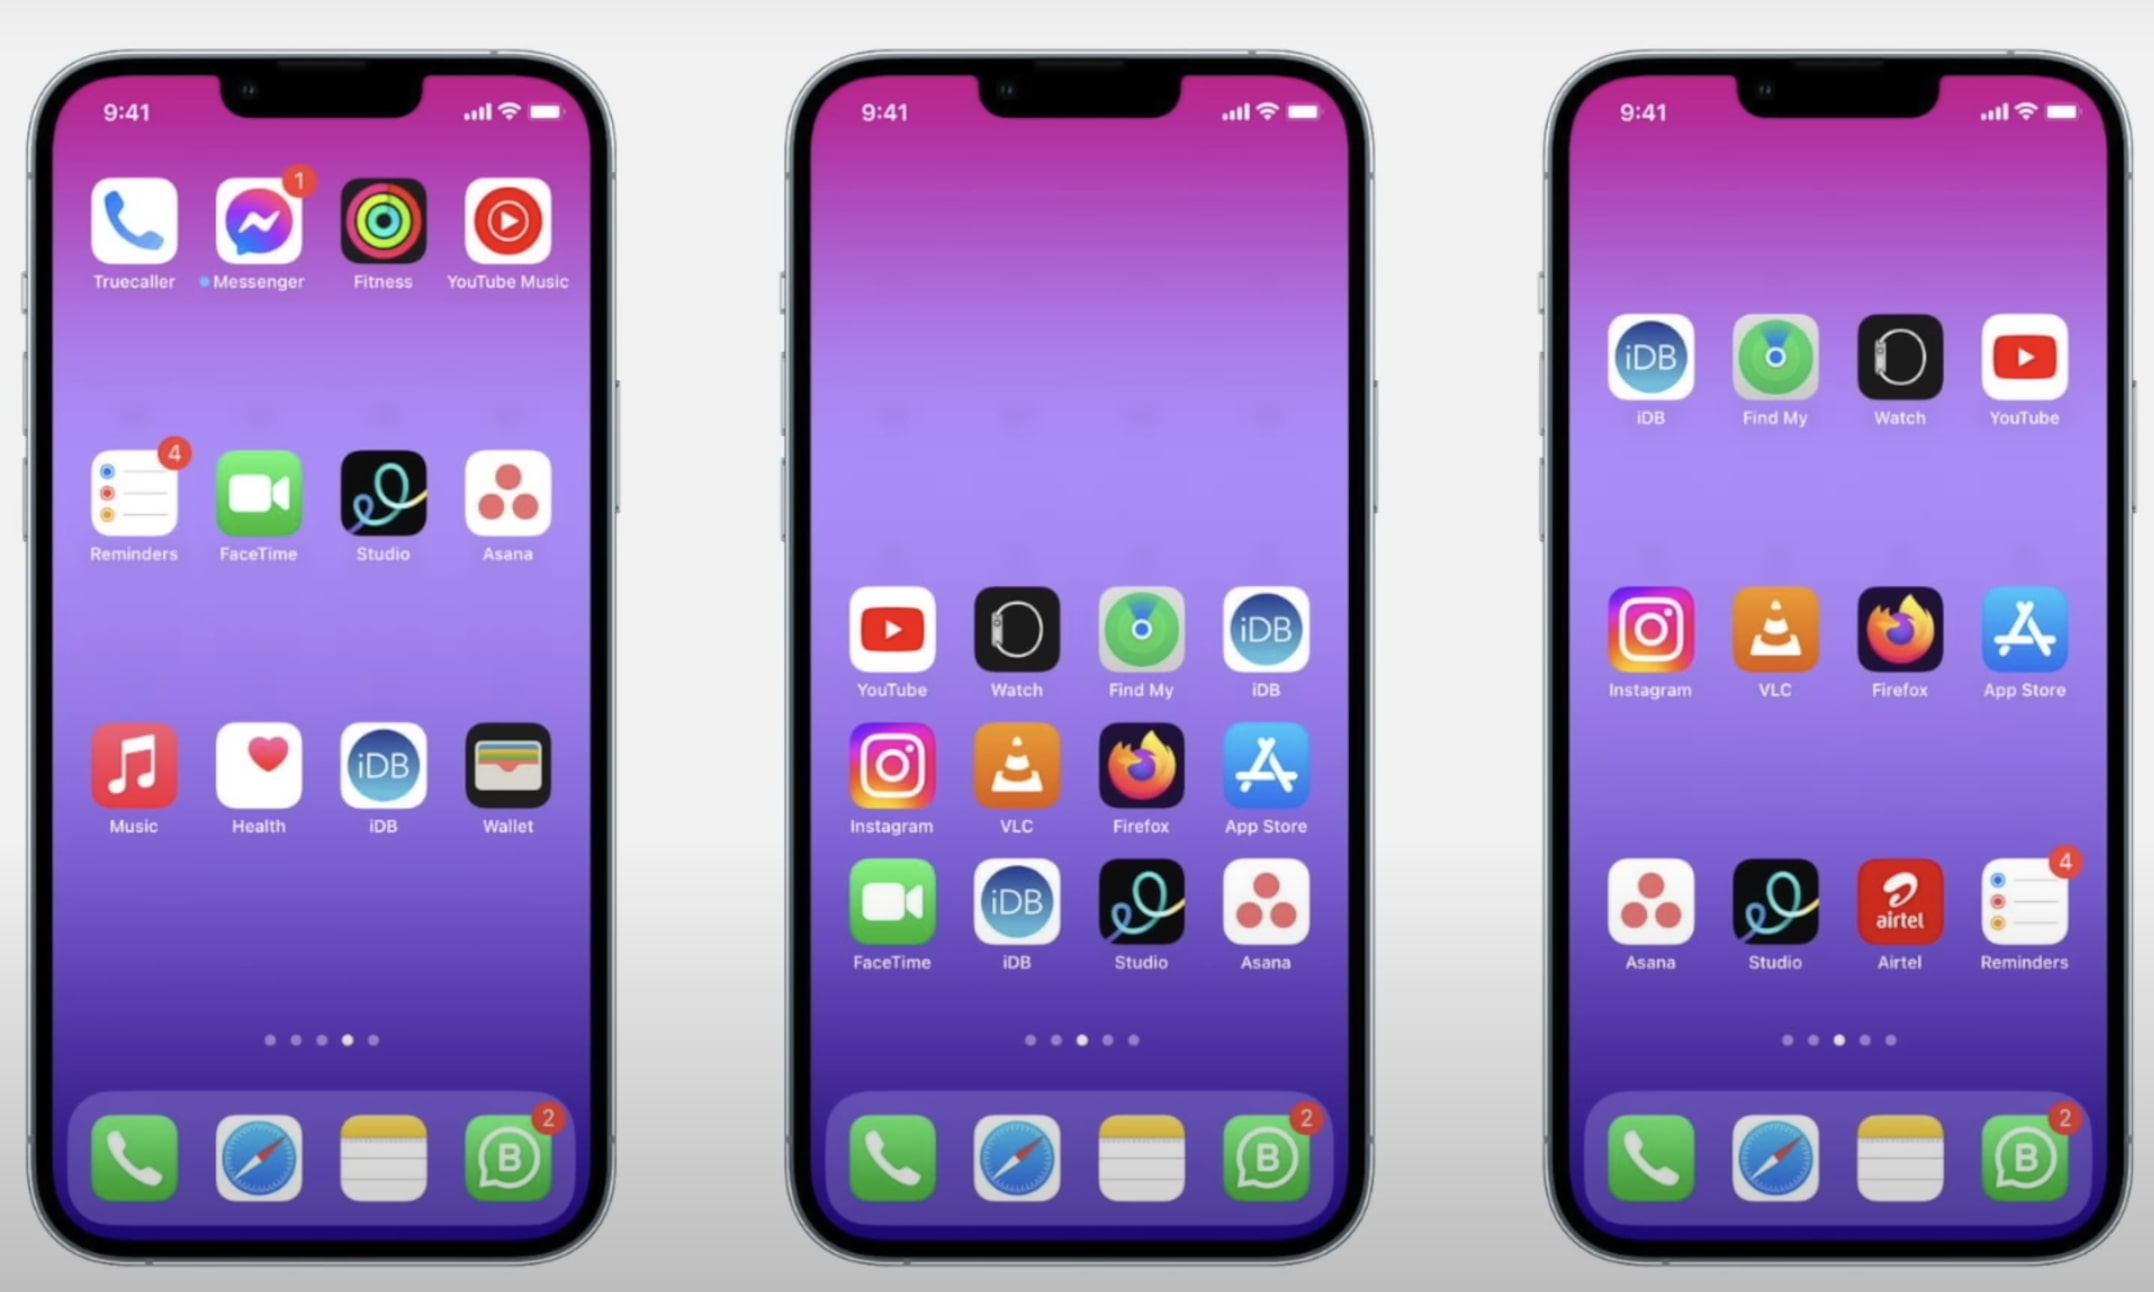 Customize your iPhone home screen with iOS 18